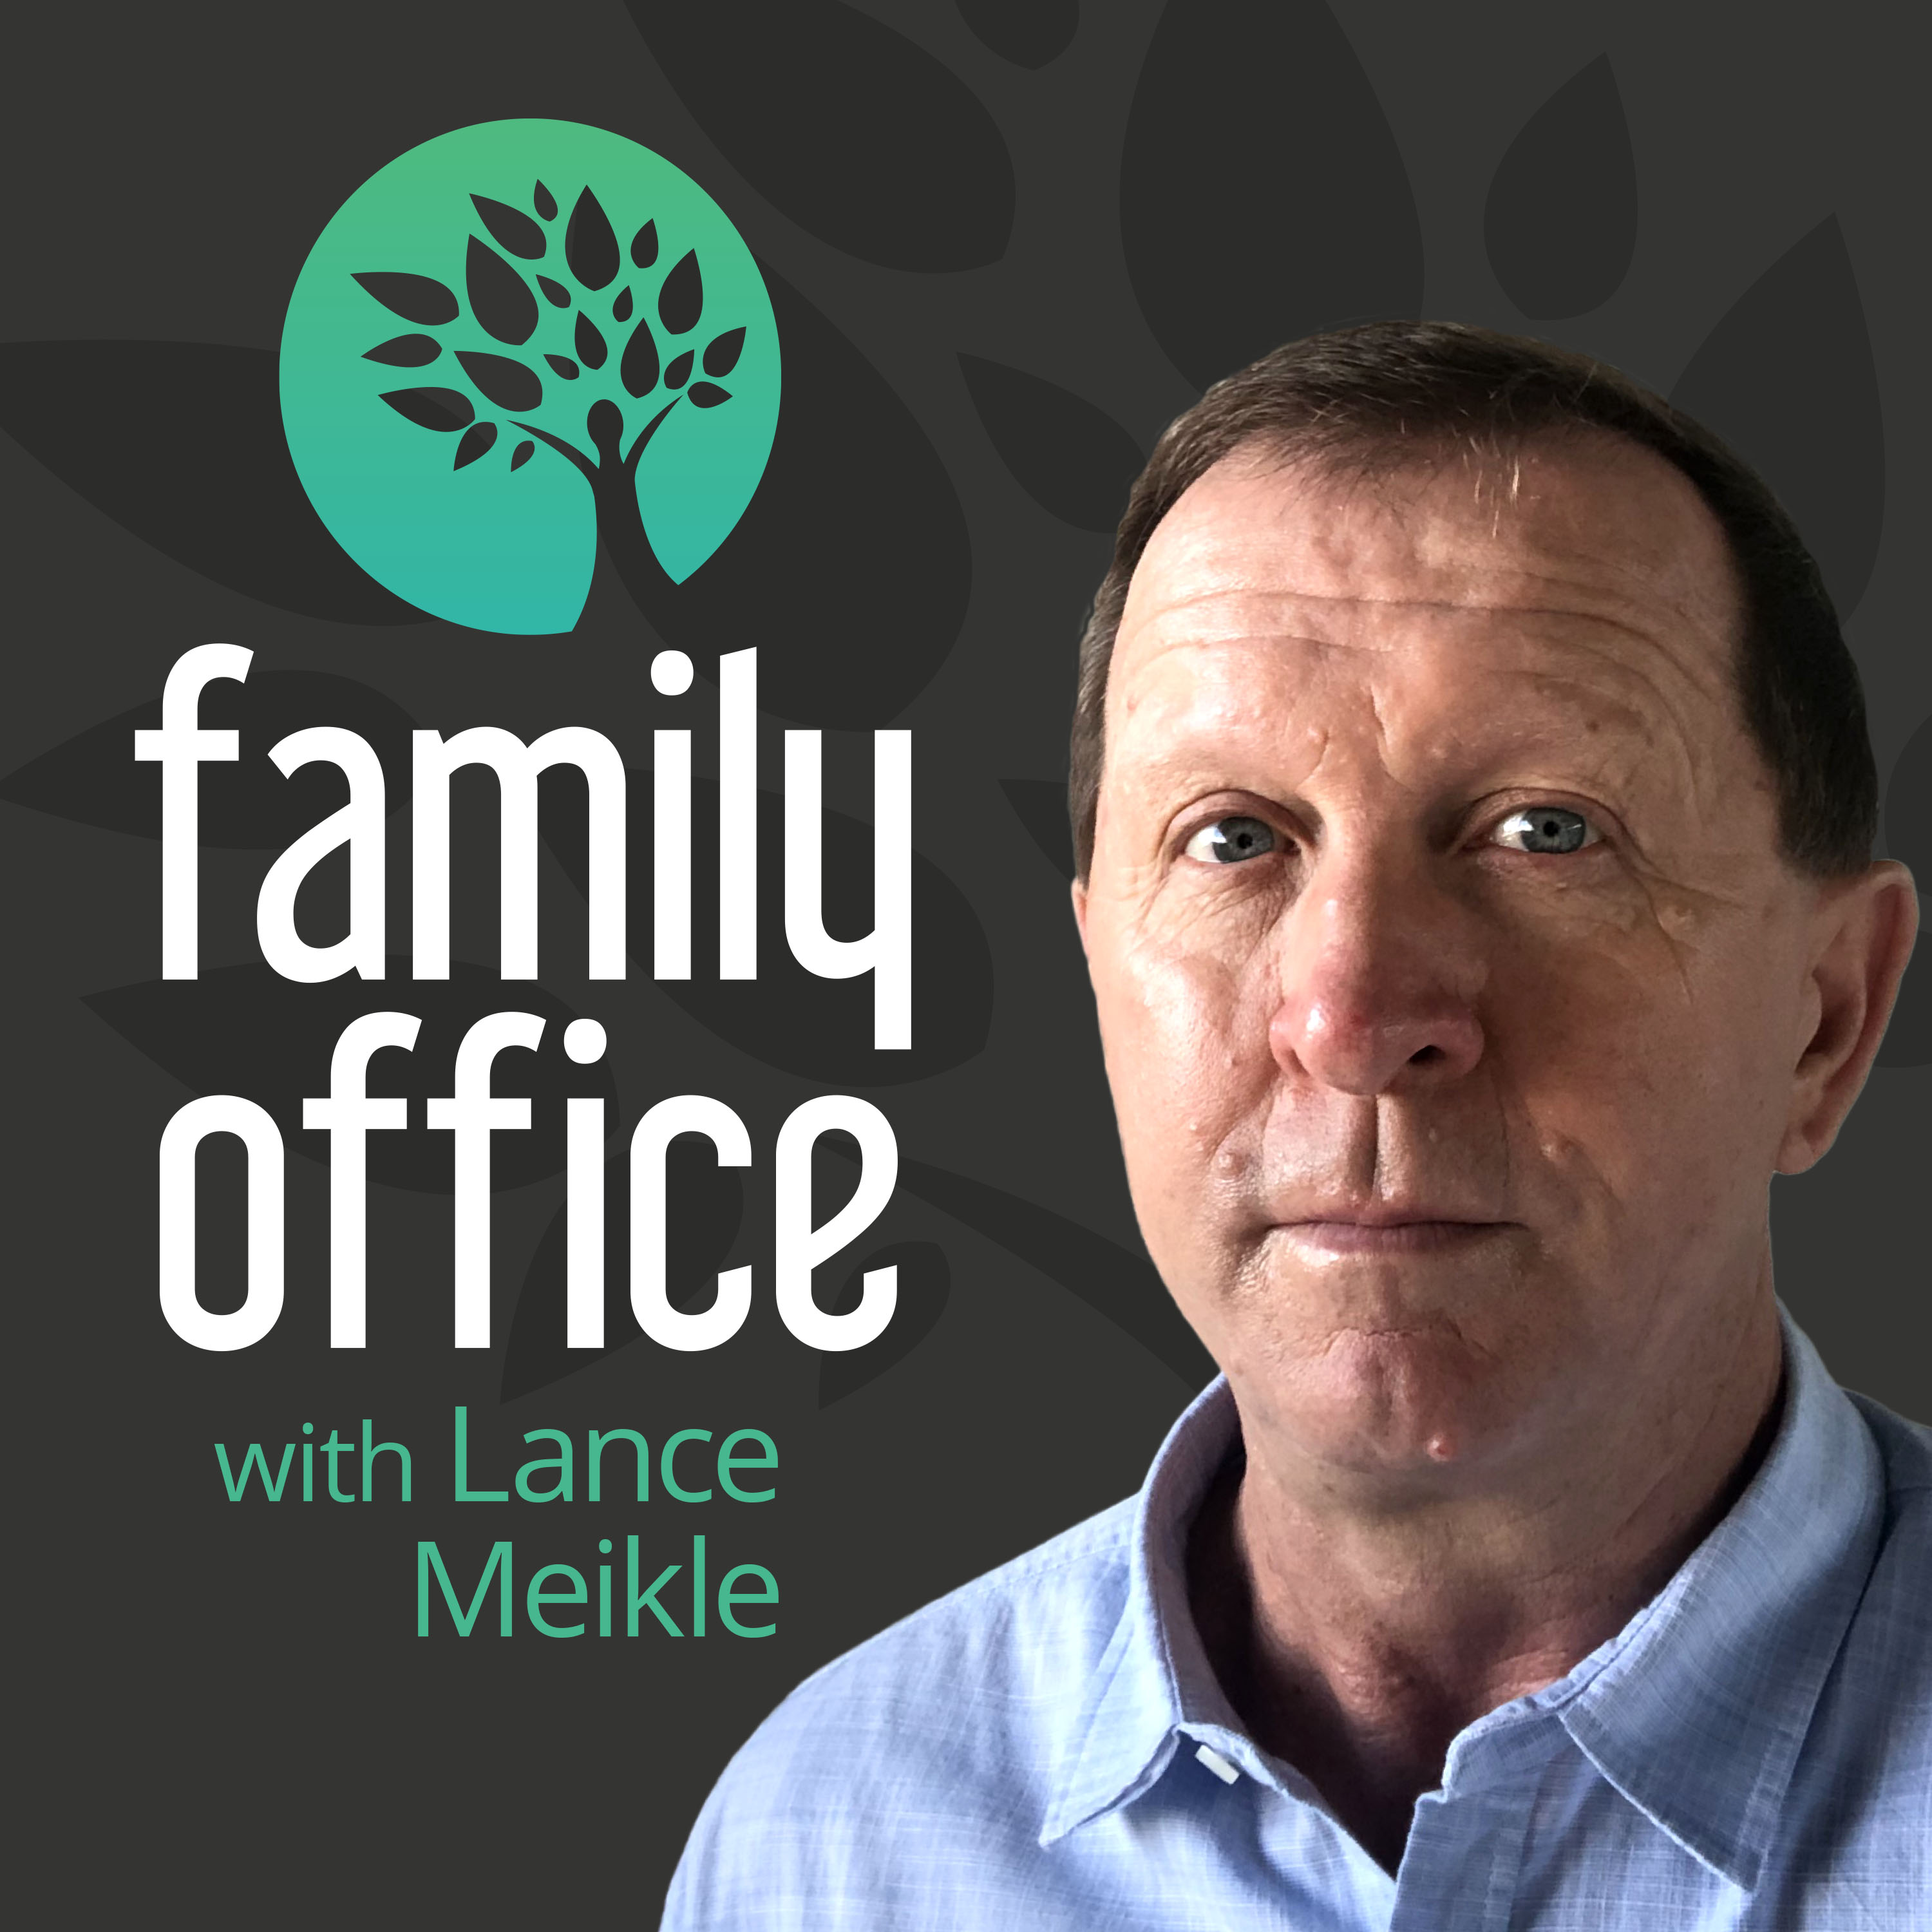 Family Office with Lance Meikle